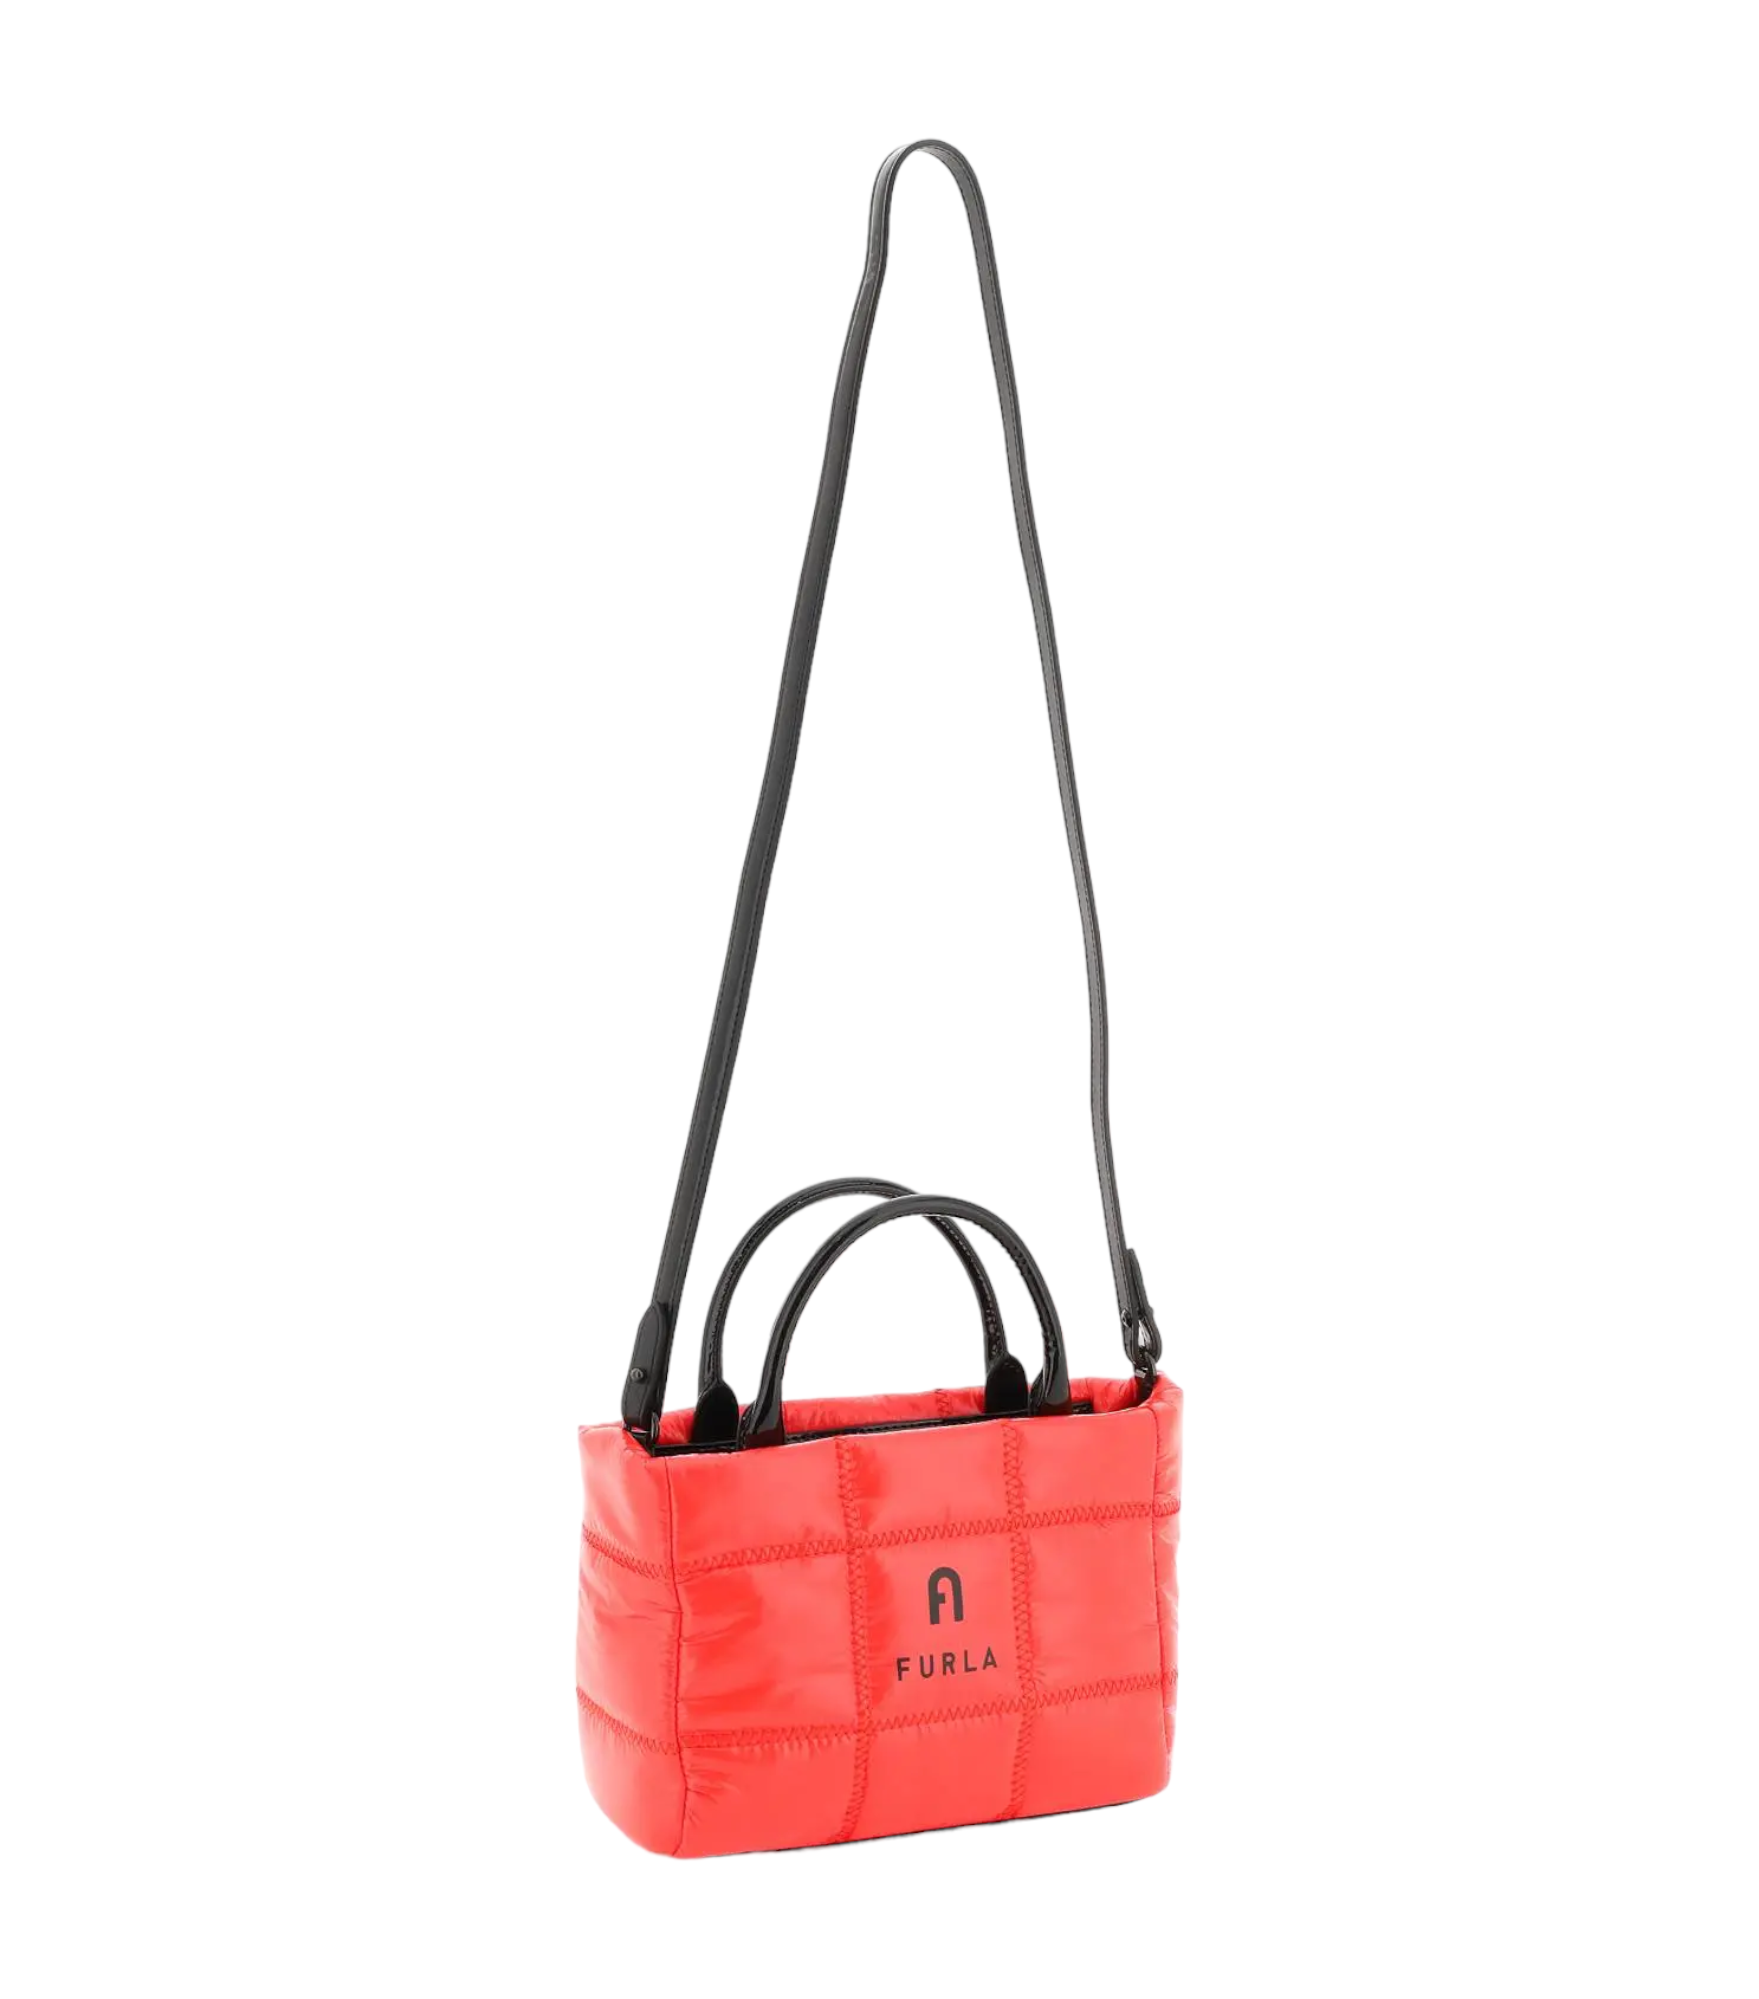 Furla Opportunity Large Tote